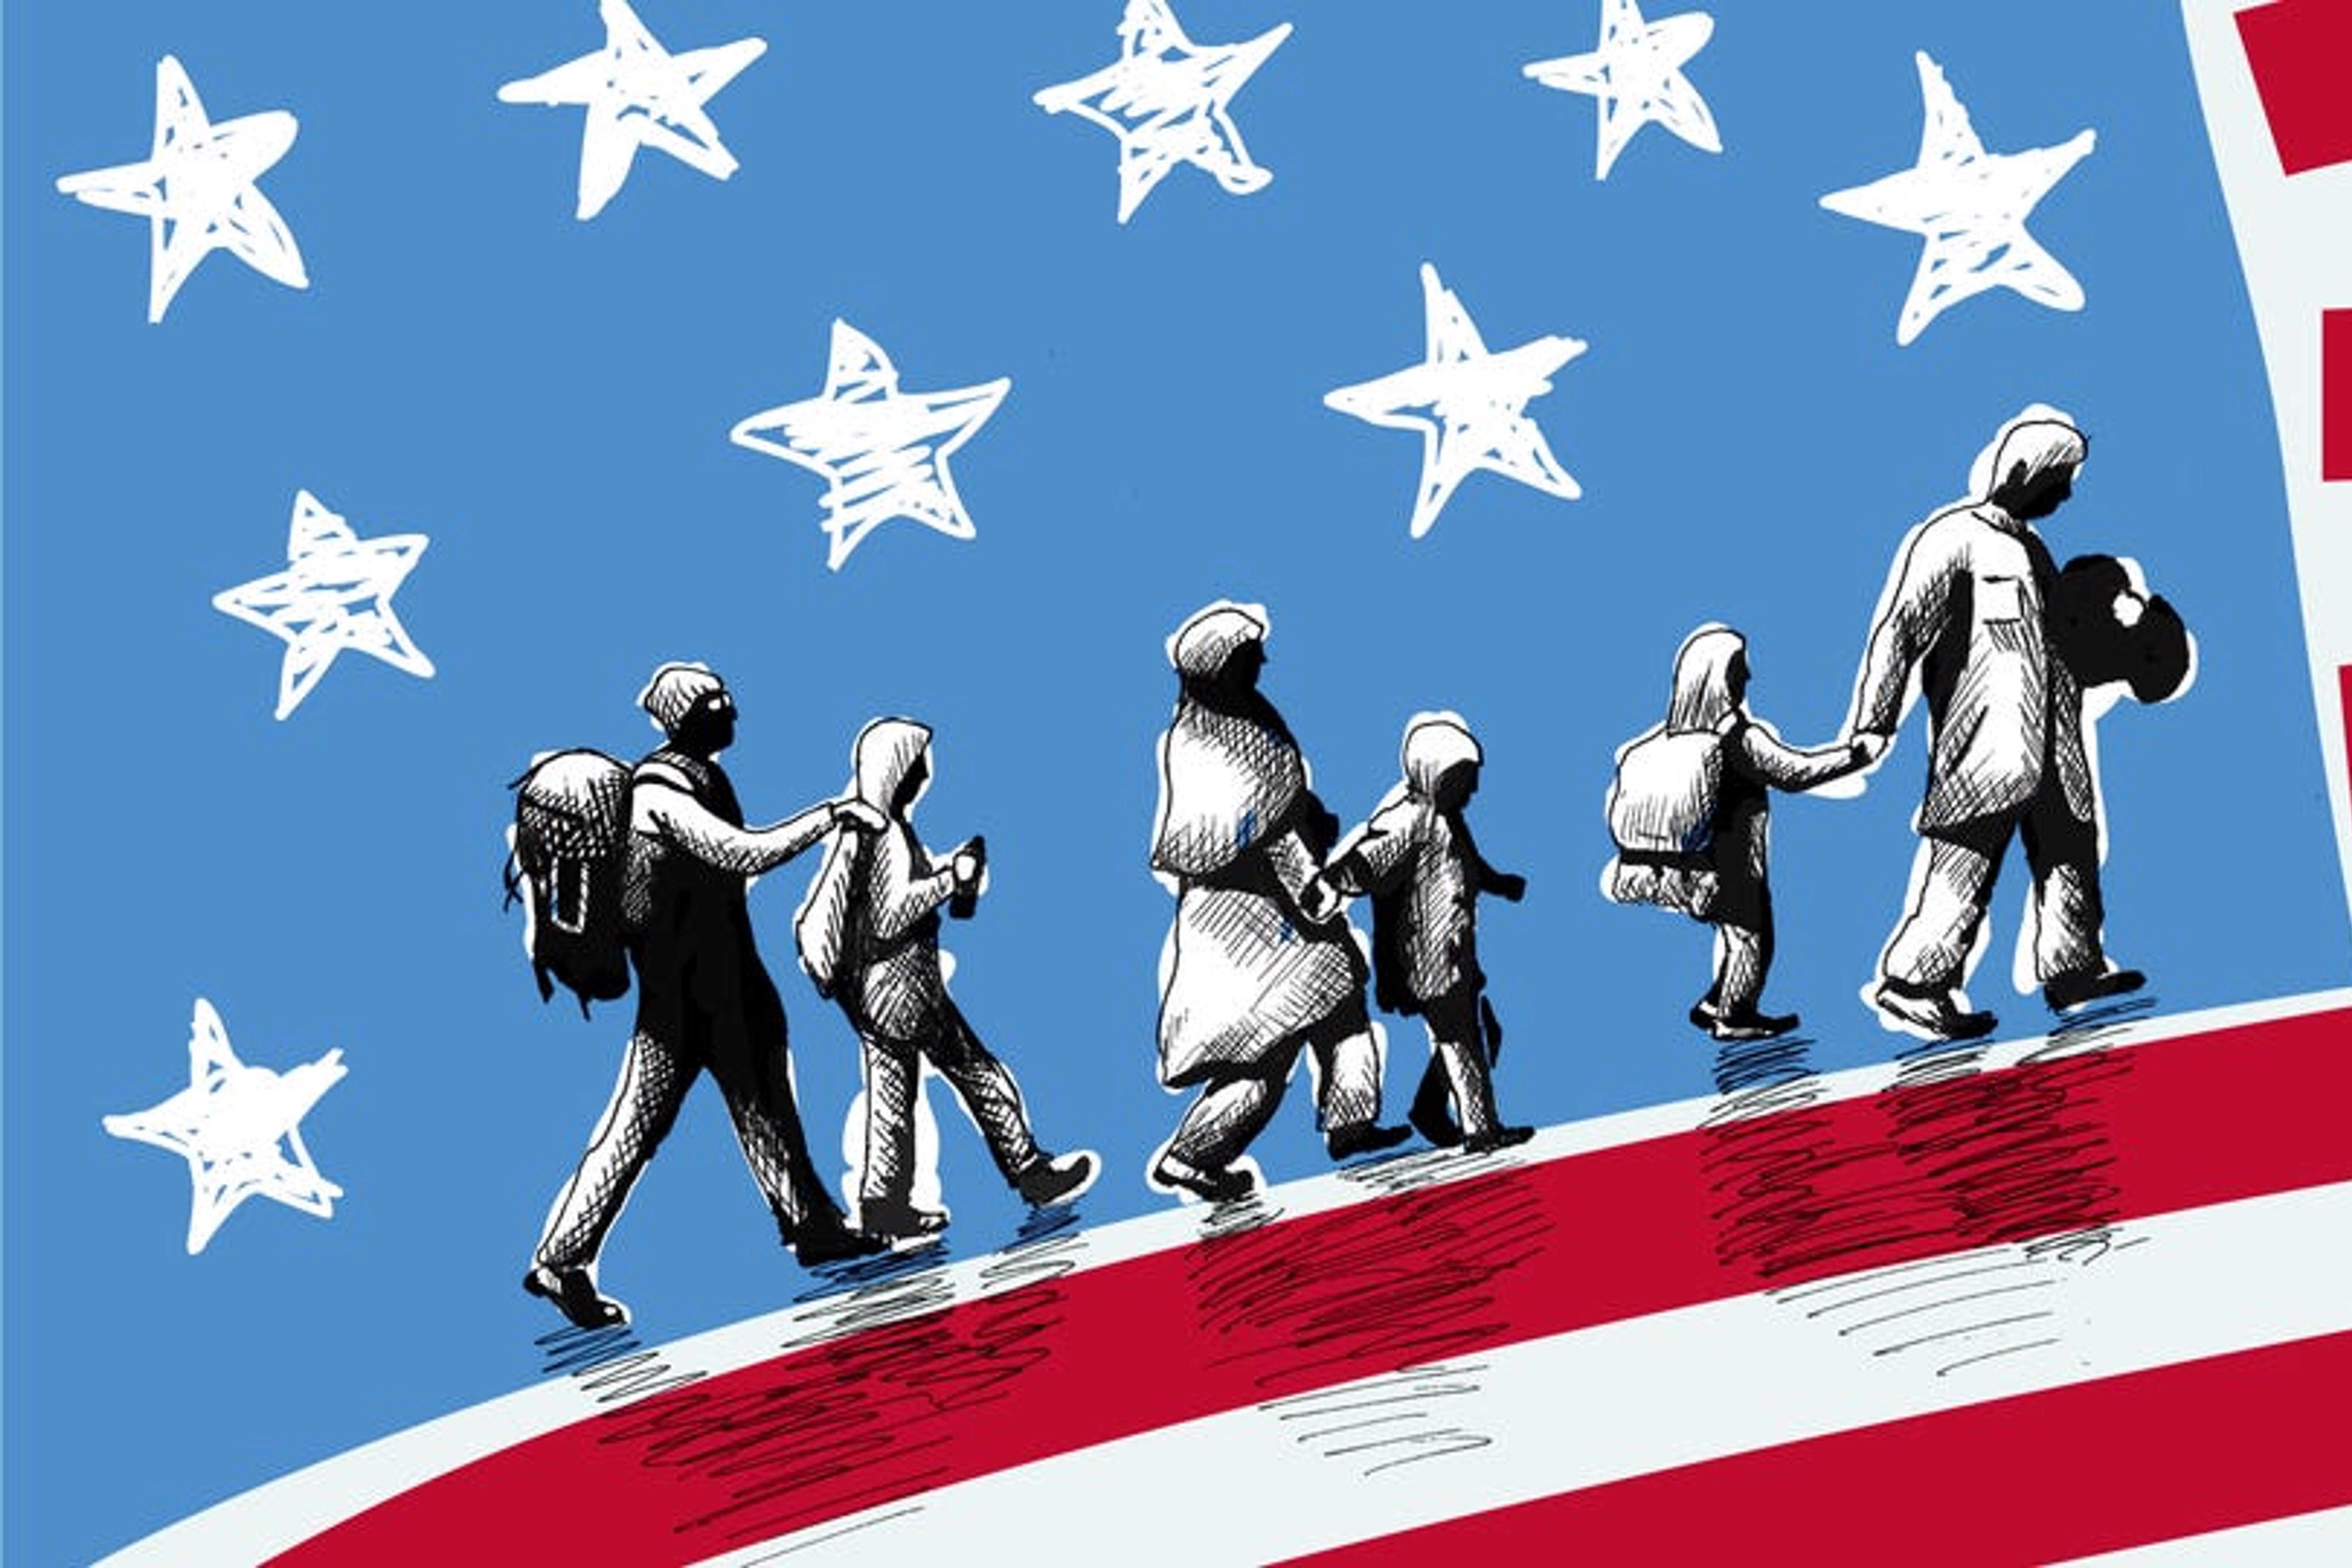 Illustration of an American flag with migrants walking across one of the stripes.